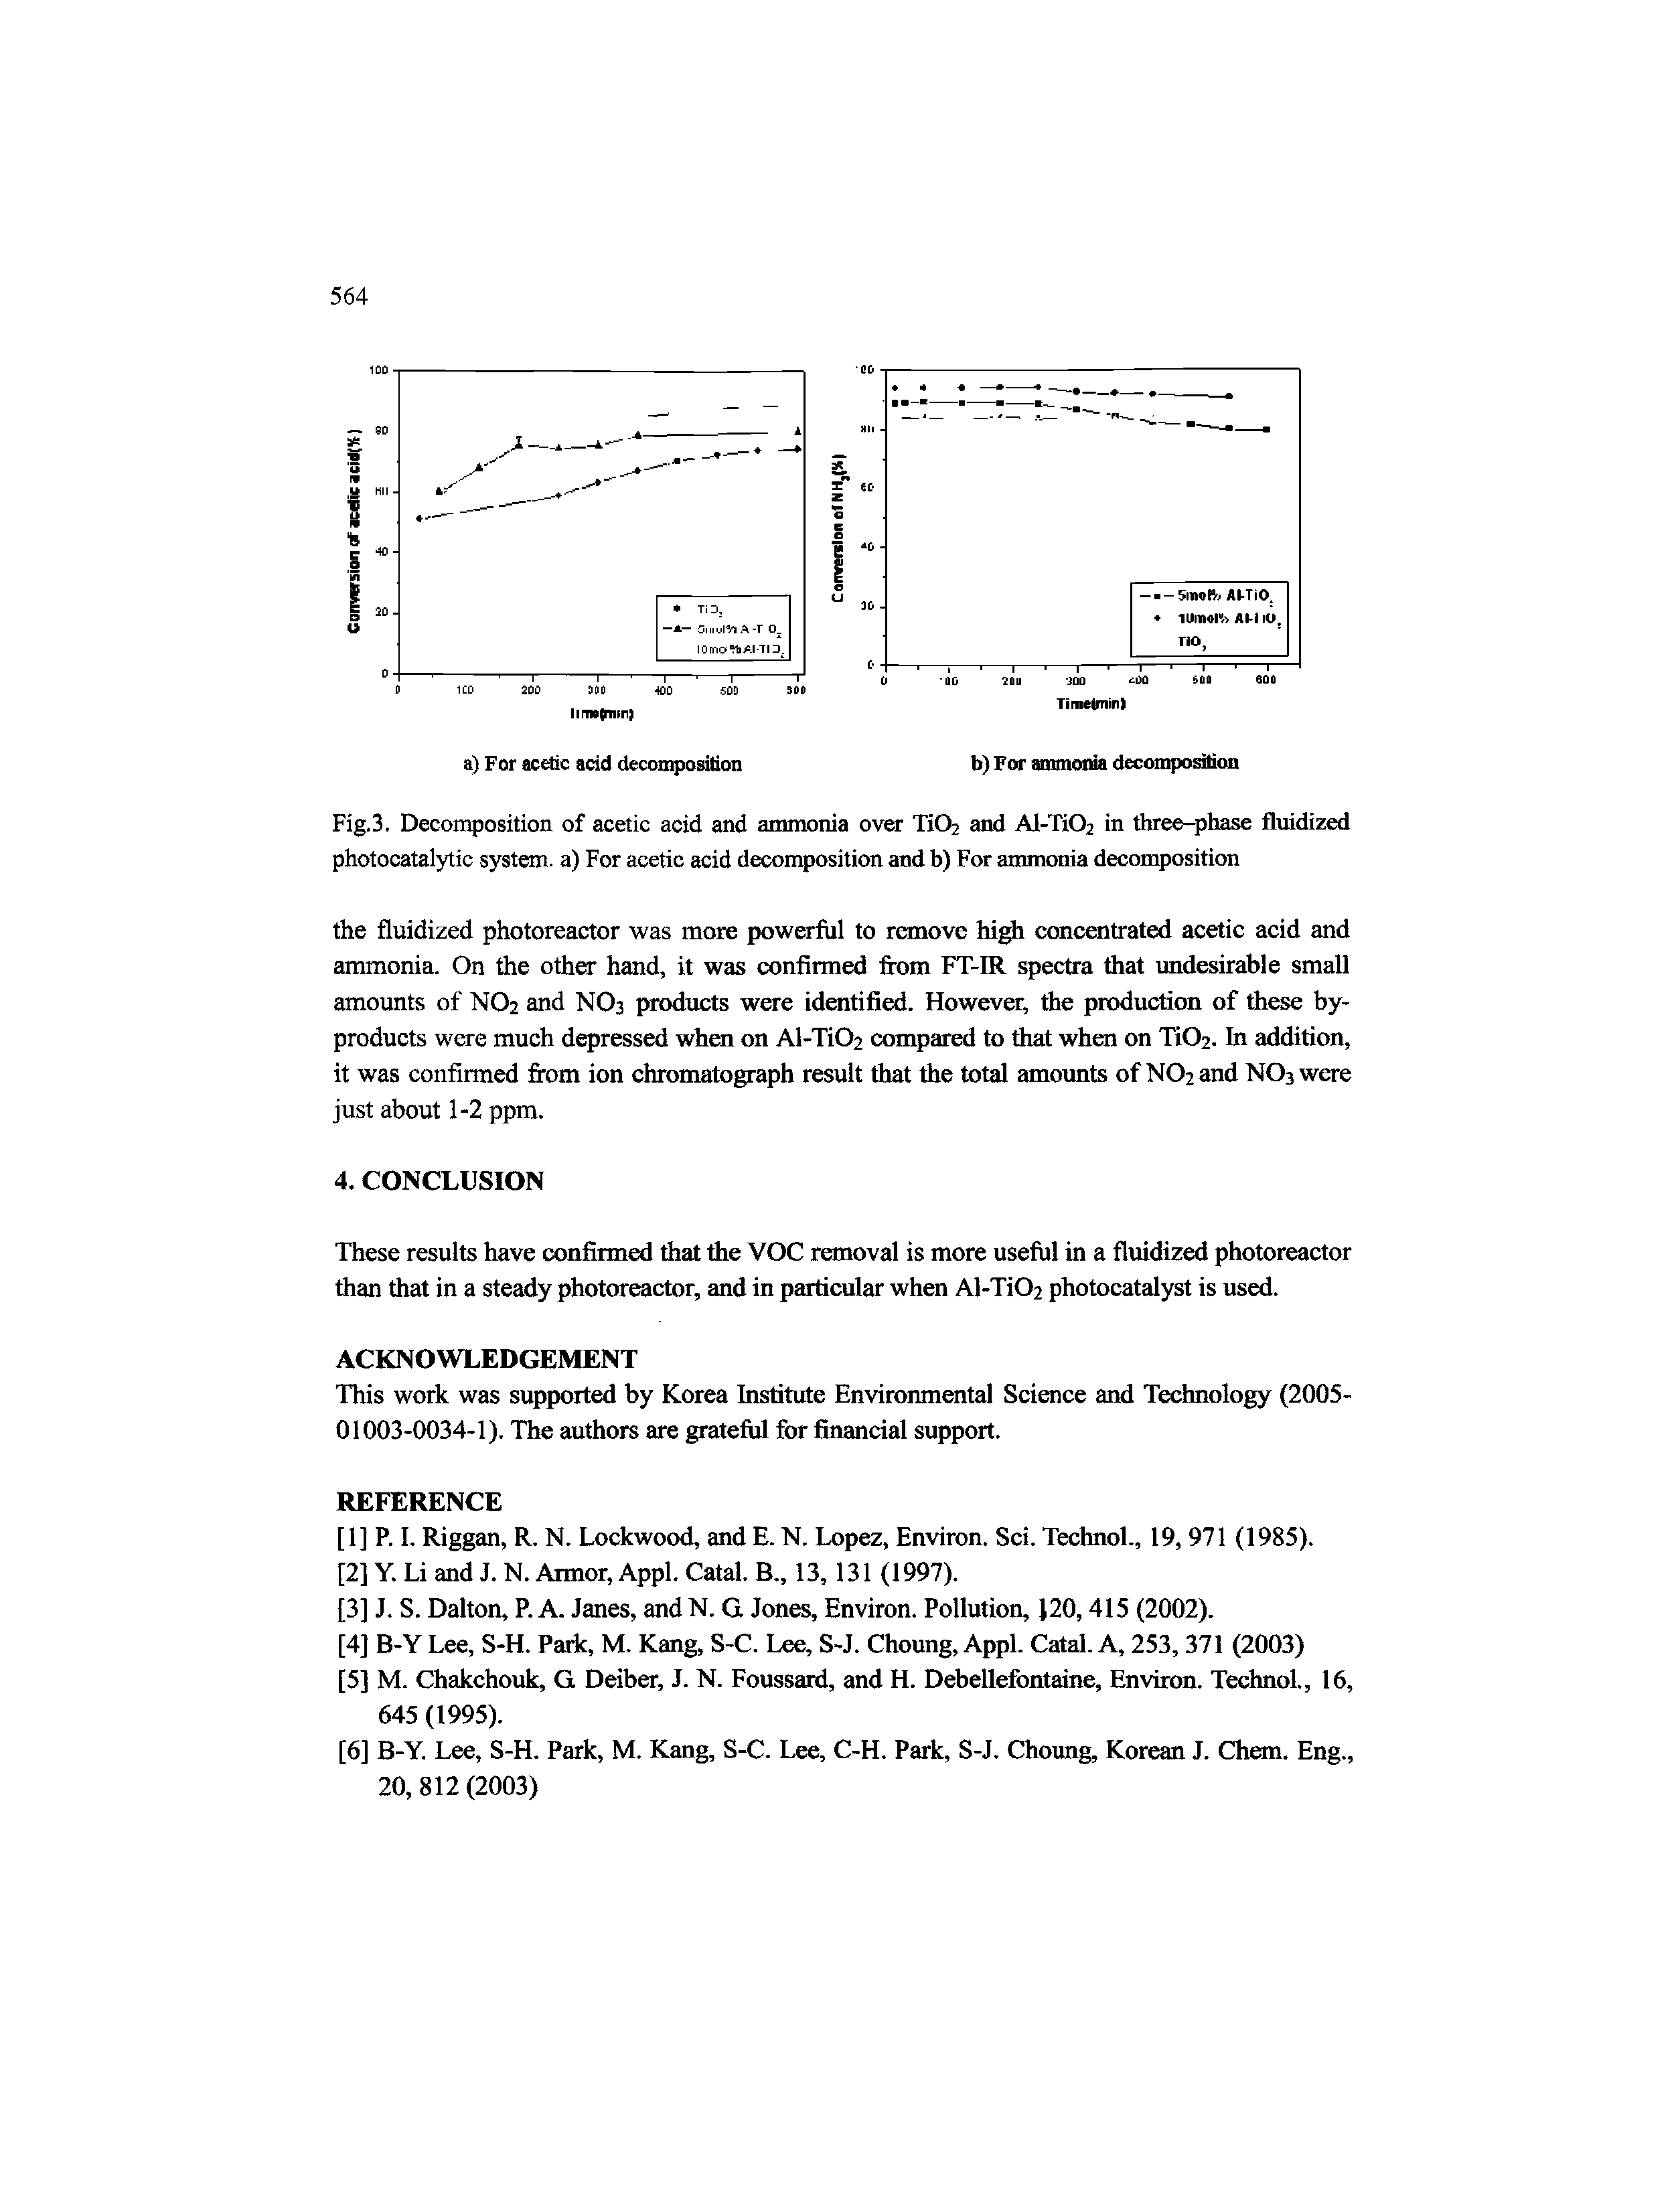 Fig.3. Decomposition of acetic acid and ammonia over Ti02 and AI-Ti02 in three-phase fluidized photocatalytic system, a) For acetic acid decomposition and b) For ammonia decomposition...